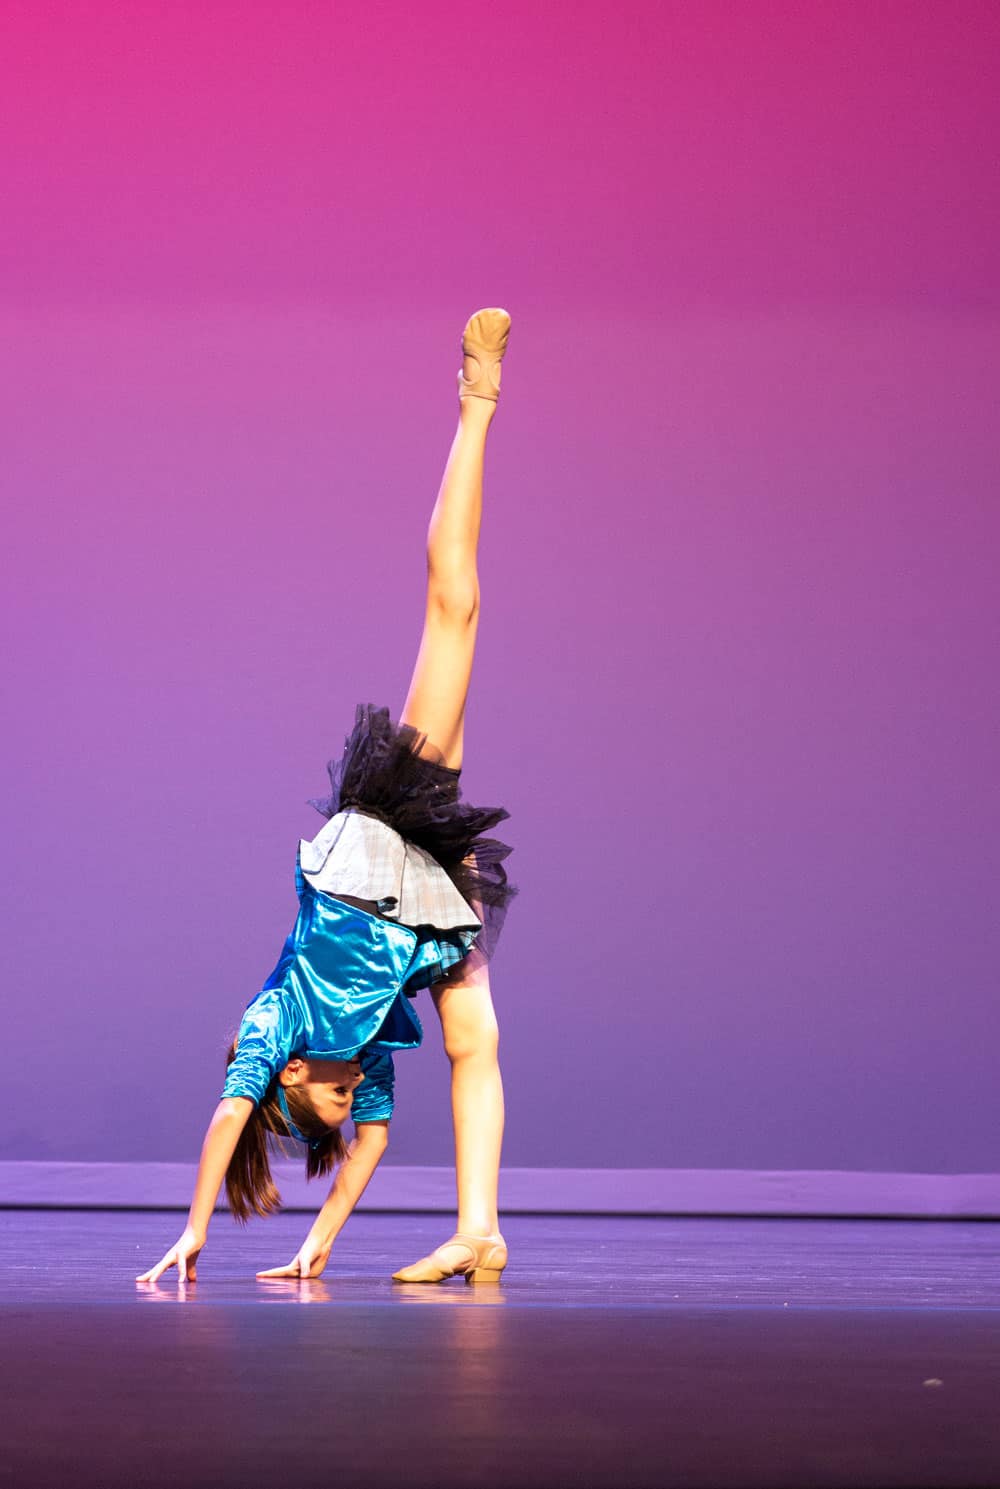 Jazz solo dancer doing a needle on stage for a dance competition performance.